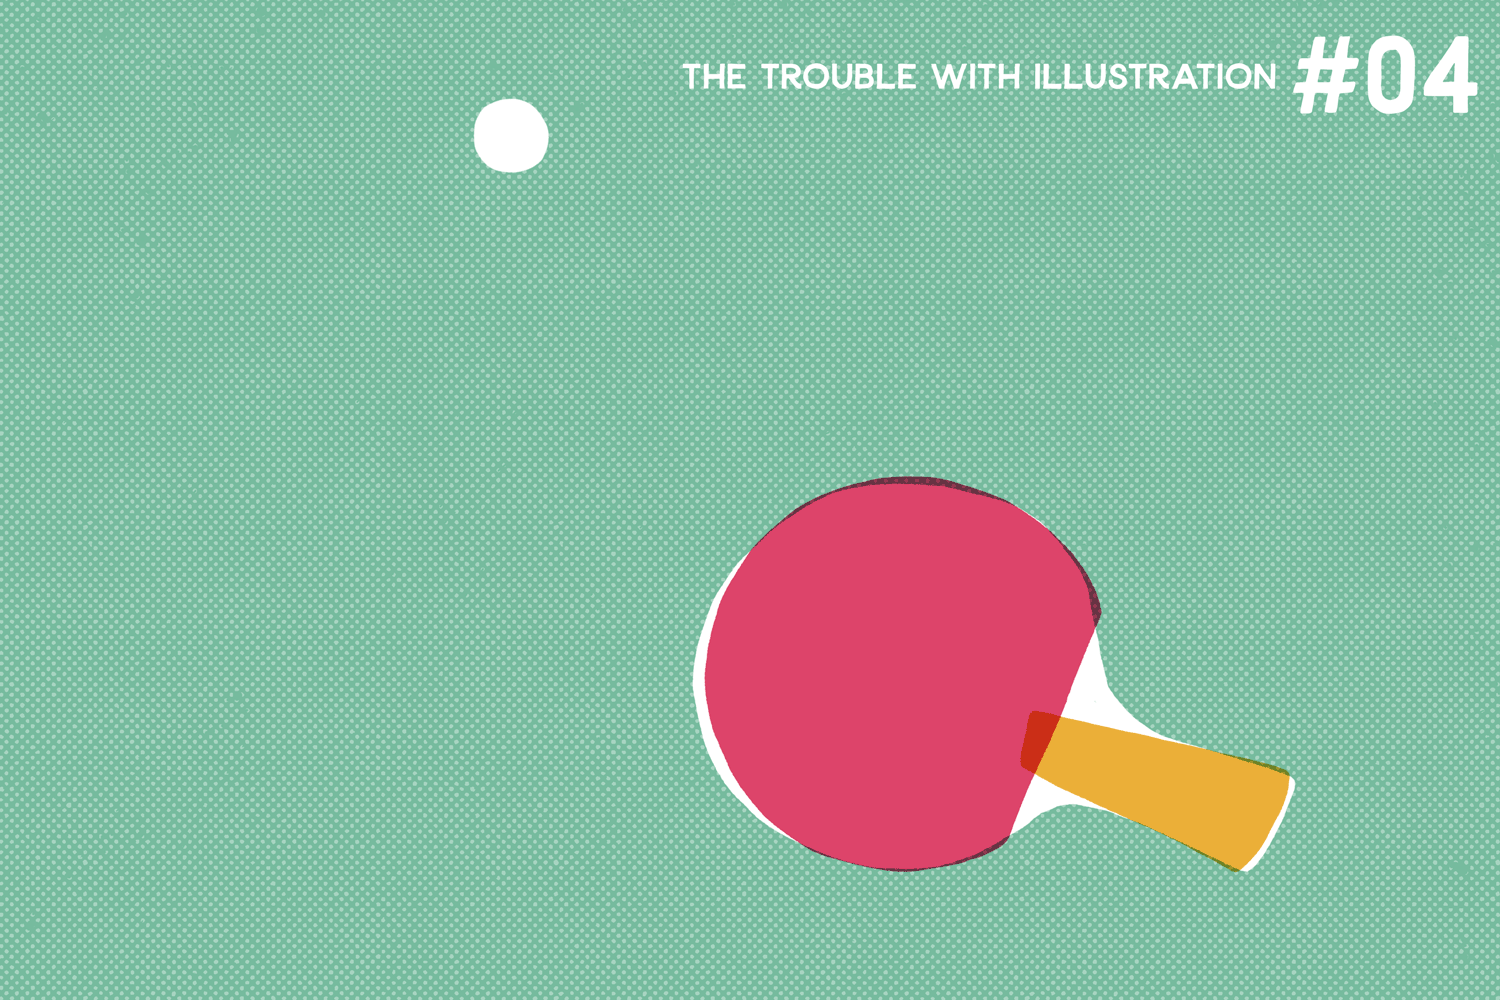 The Trouble With Illustration #04: Turnaround Times - The difficulty of  being reactive and being able to create materials quickly — Carys-ink |  Freelance Illustrator & Graphic Designer, Bristol UK